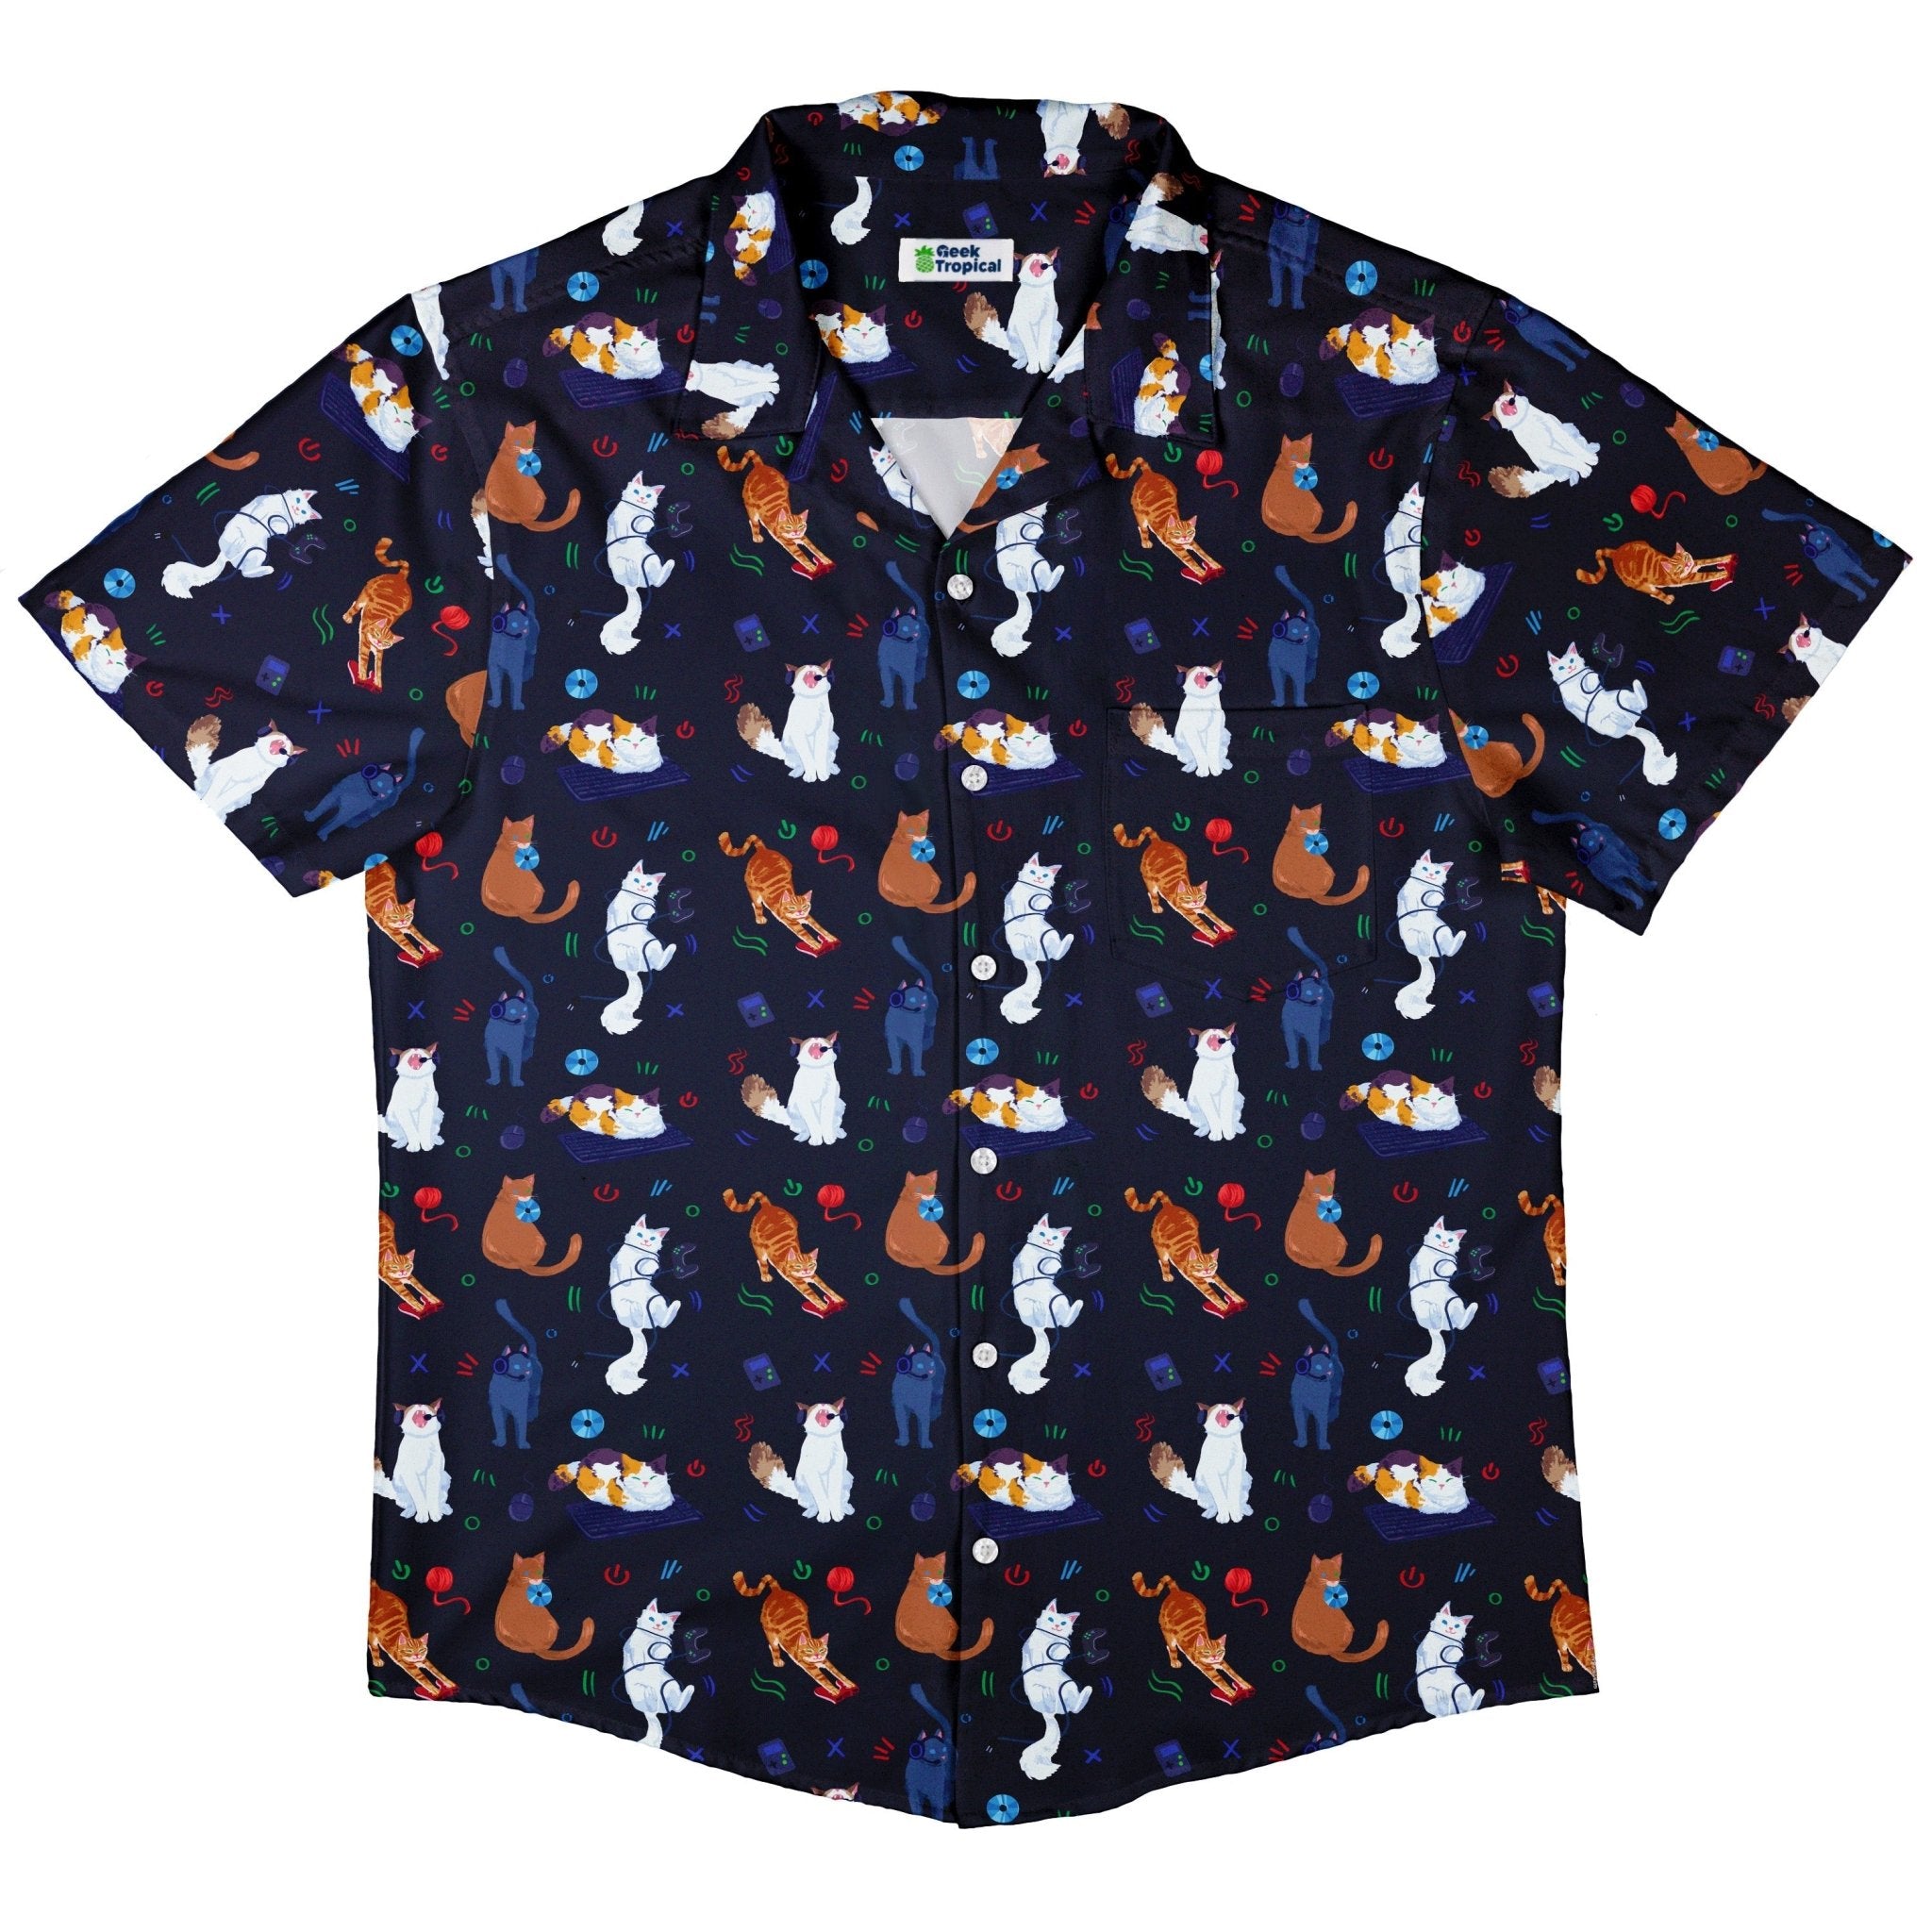 Video Game Cats Dark Button Up Shirt - adult sizing - Animal Patterns - Design by Claire Murphy